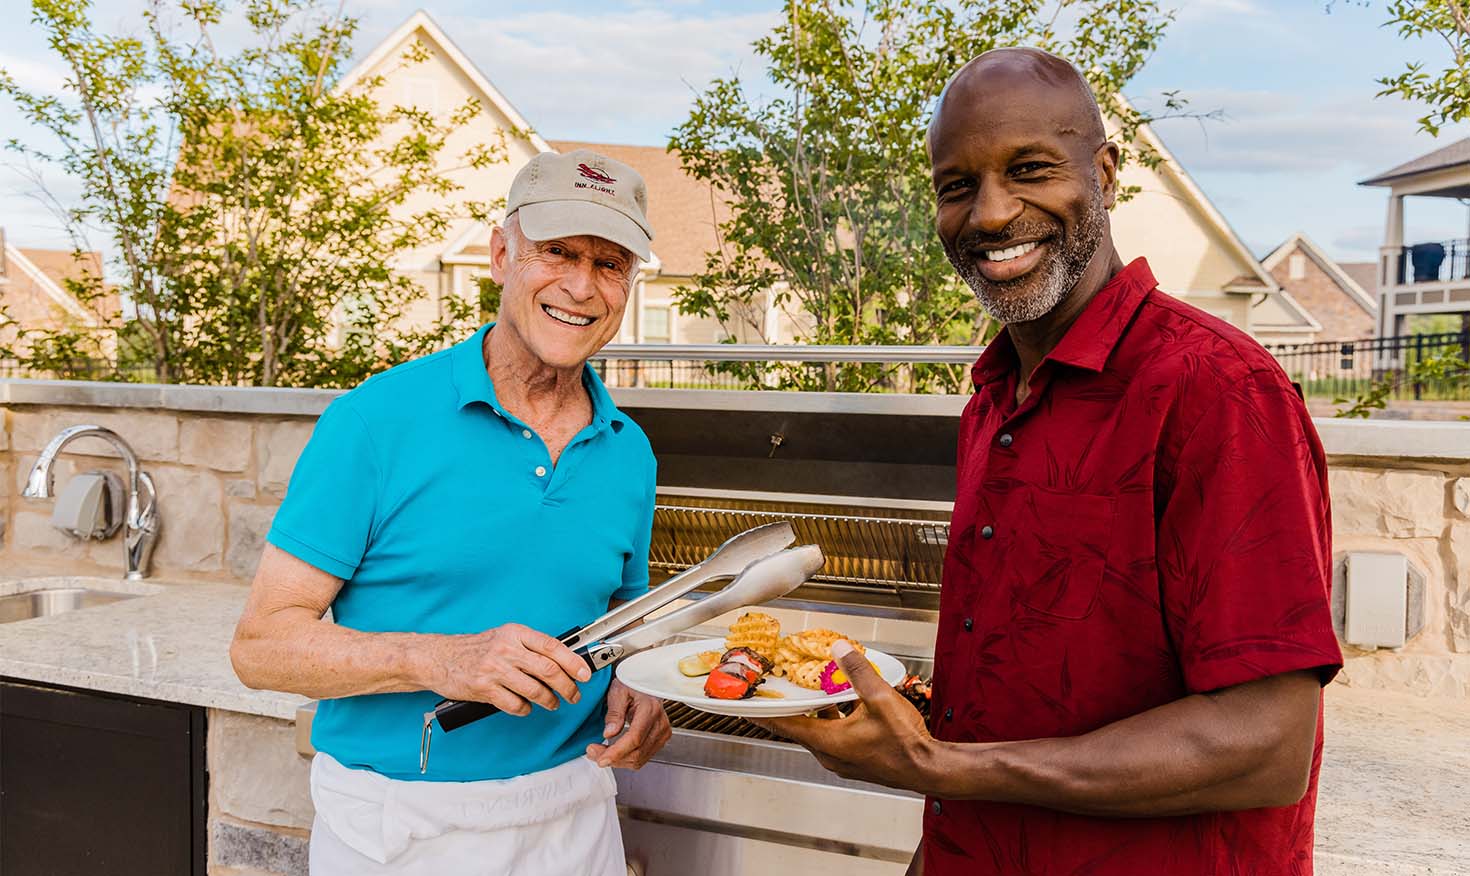 Two senior men grilling food outdoors